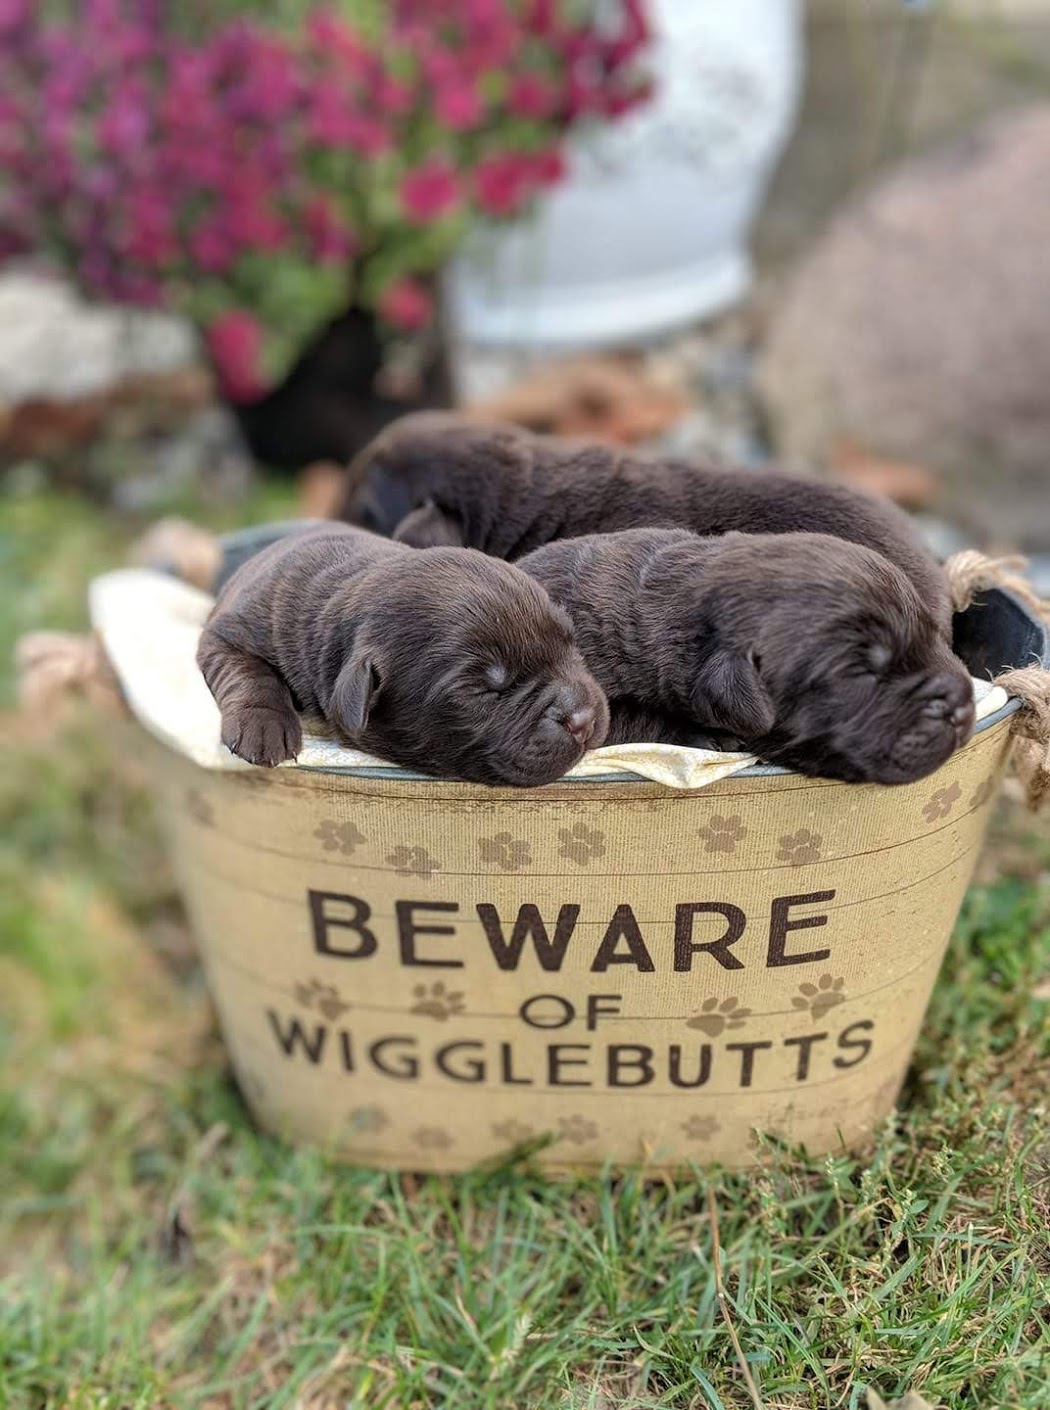 Wigglebutts coming soon!